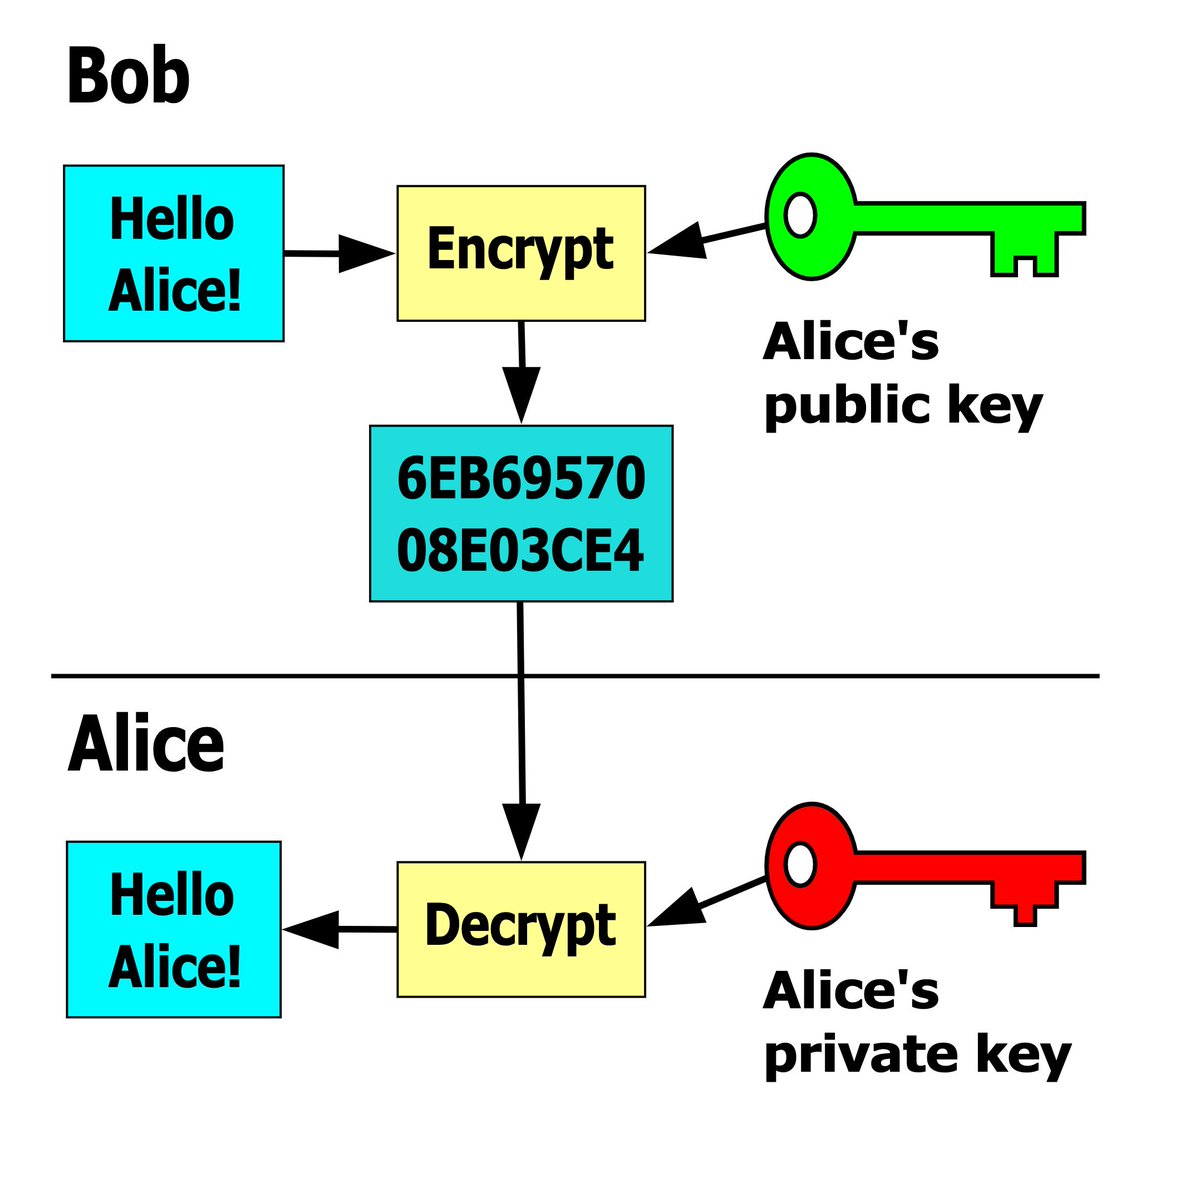 In public-key cryptography, you want a problem that is hard to solve but easy to verify. In RSA encryption, it is hard to factor a 1024-bit number to get the private key needed to decrypt the message, but easy to verify the decryption given the private+public key. [19/n]